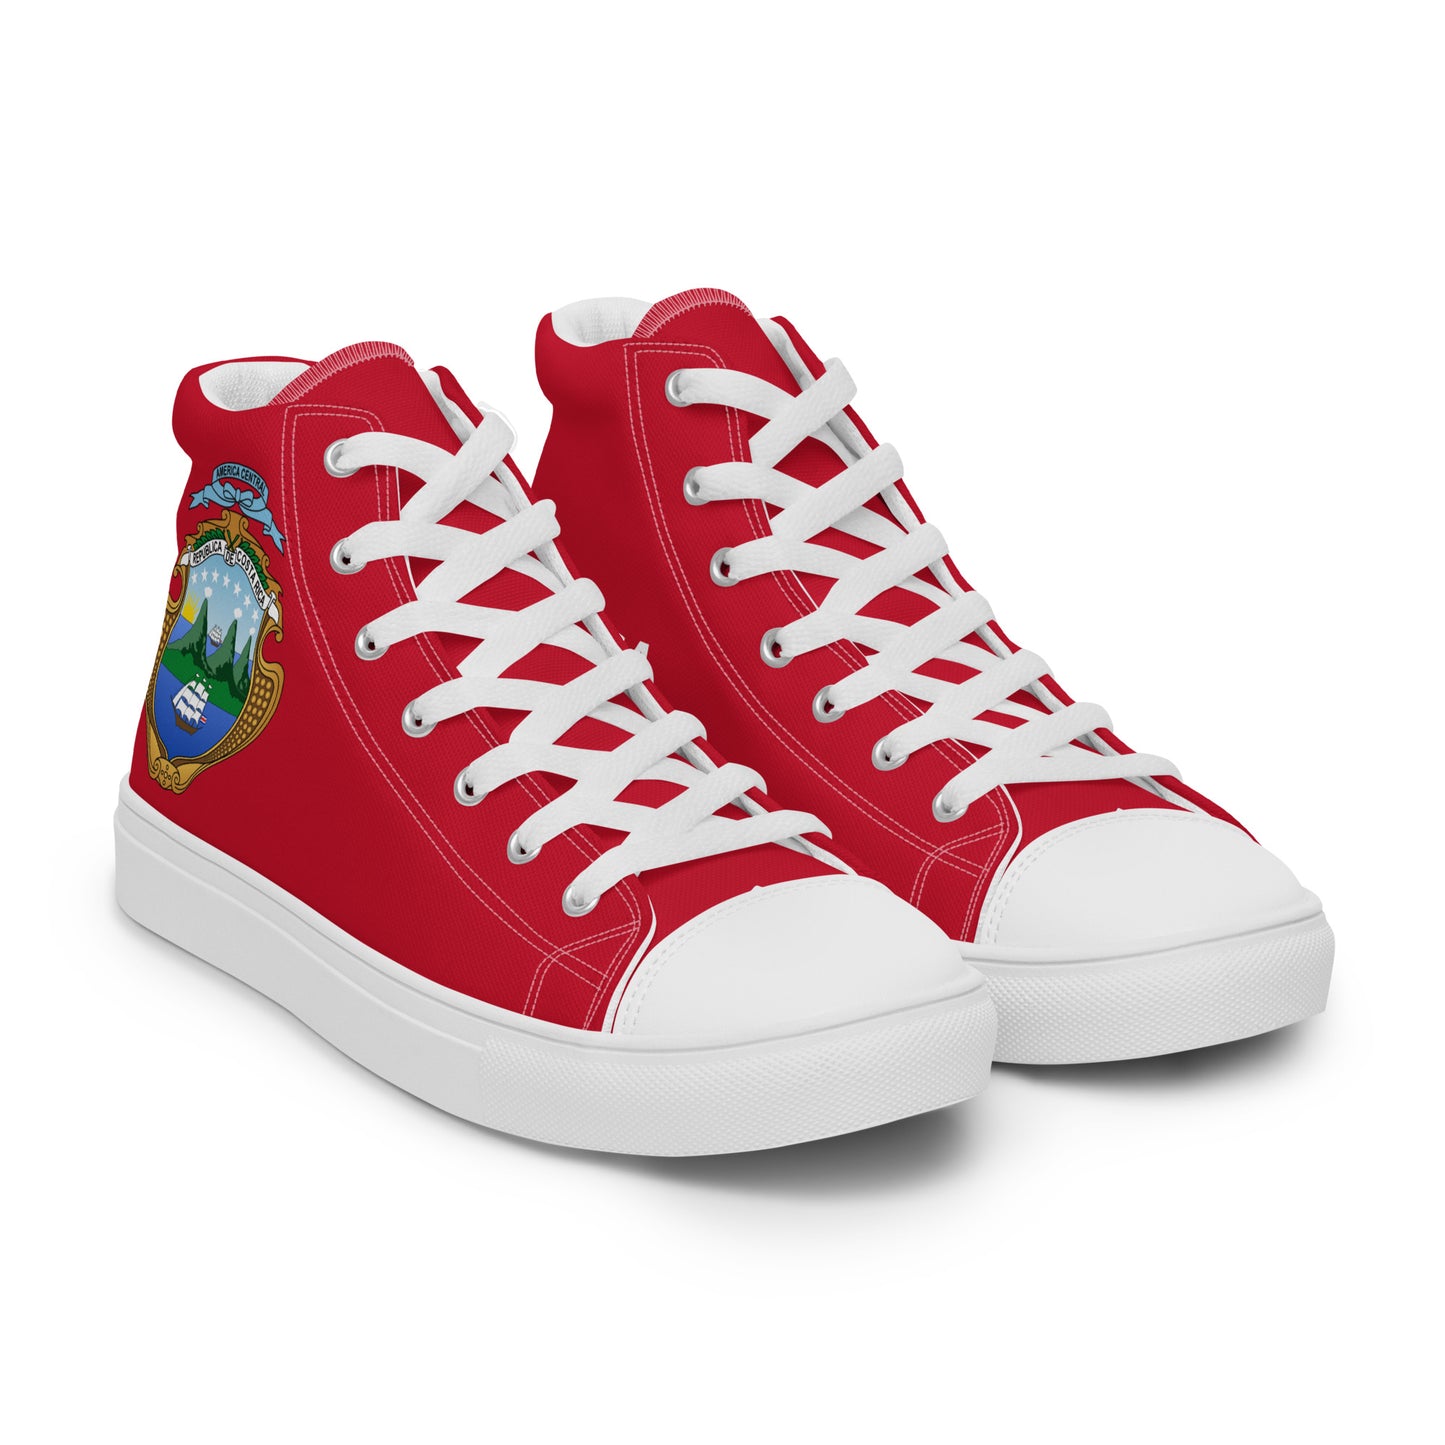 Costa Rica - Men - Red - High top shoes